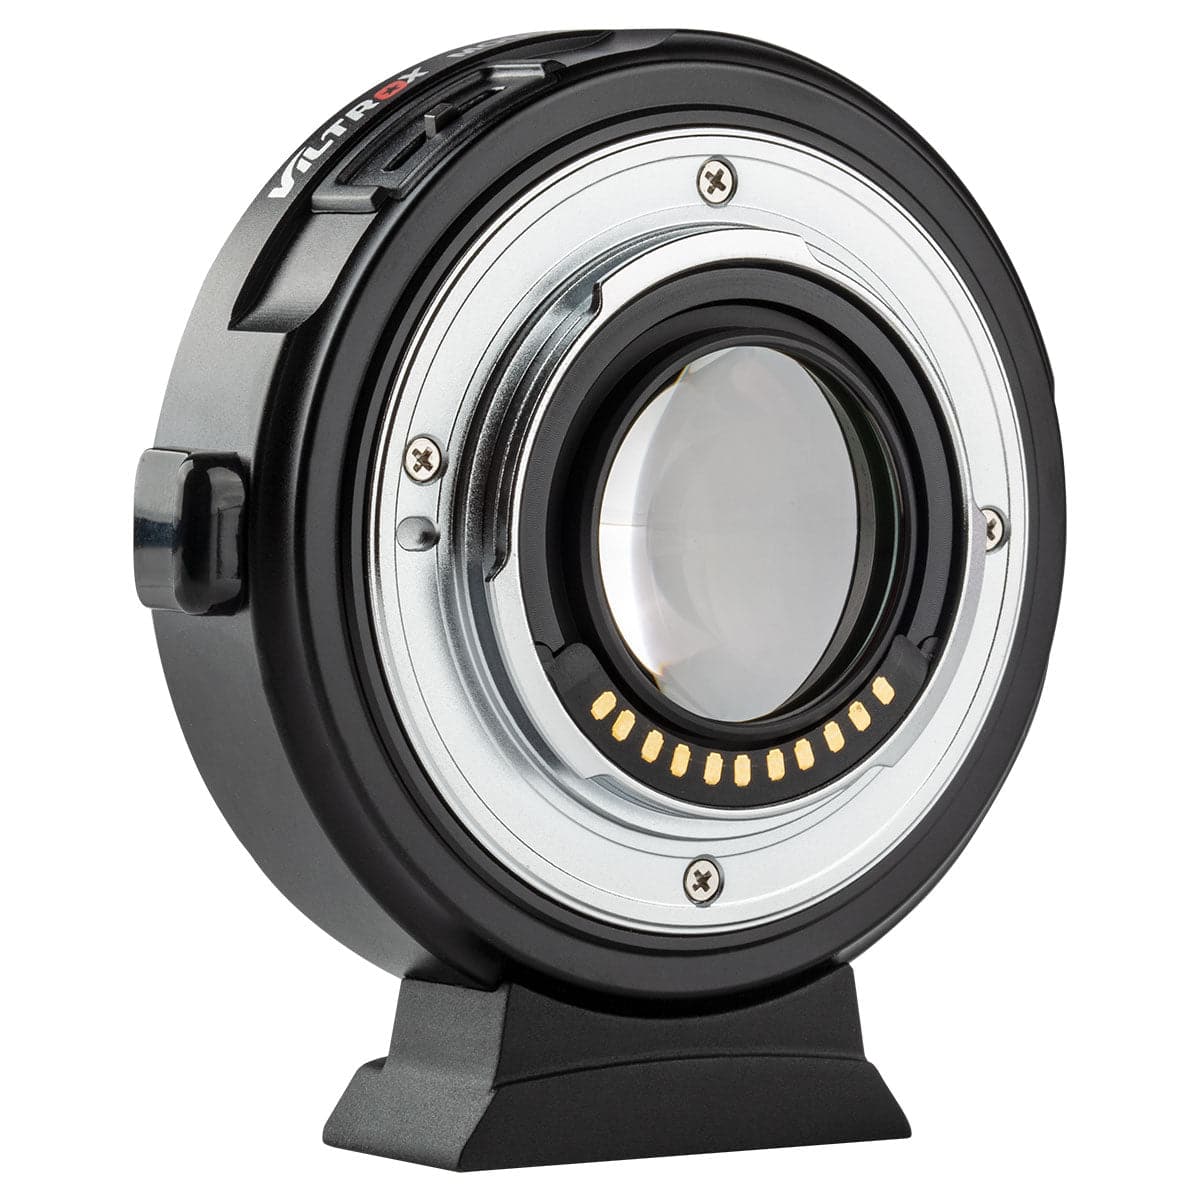 VILTROX EF-M2 II Focal Reducer Speed Booster Adapterfor Canon EF Mount